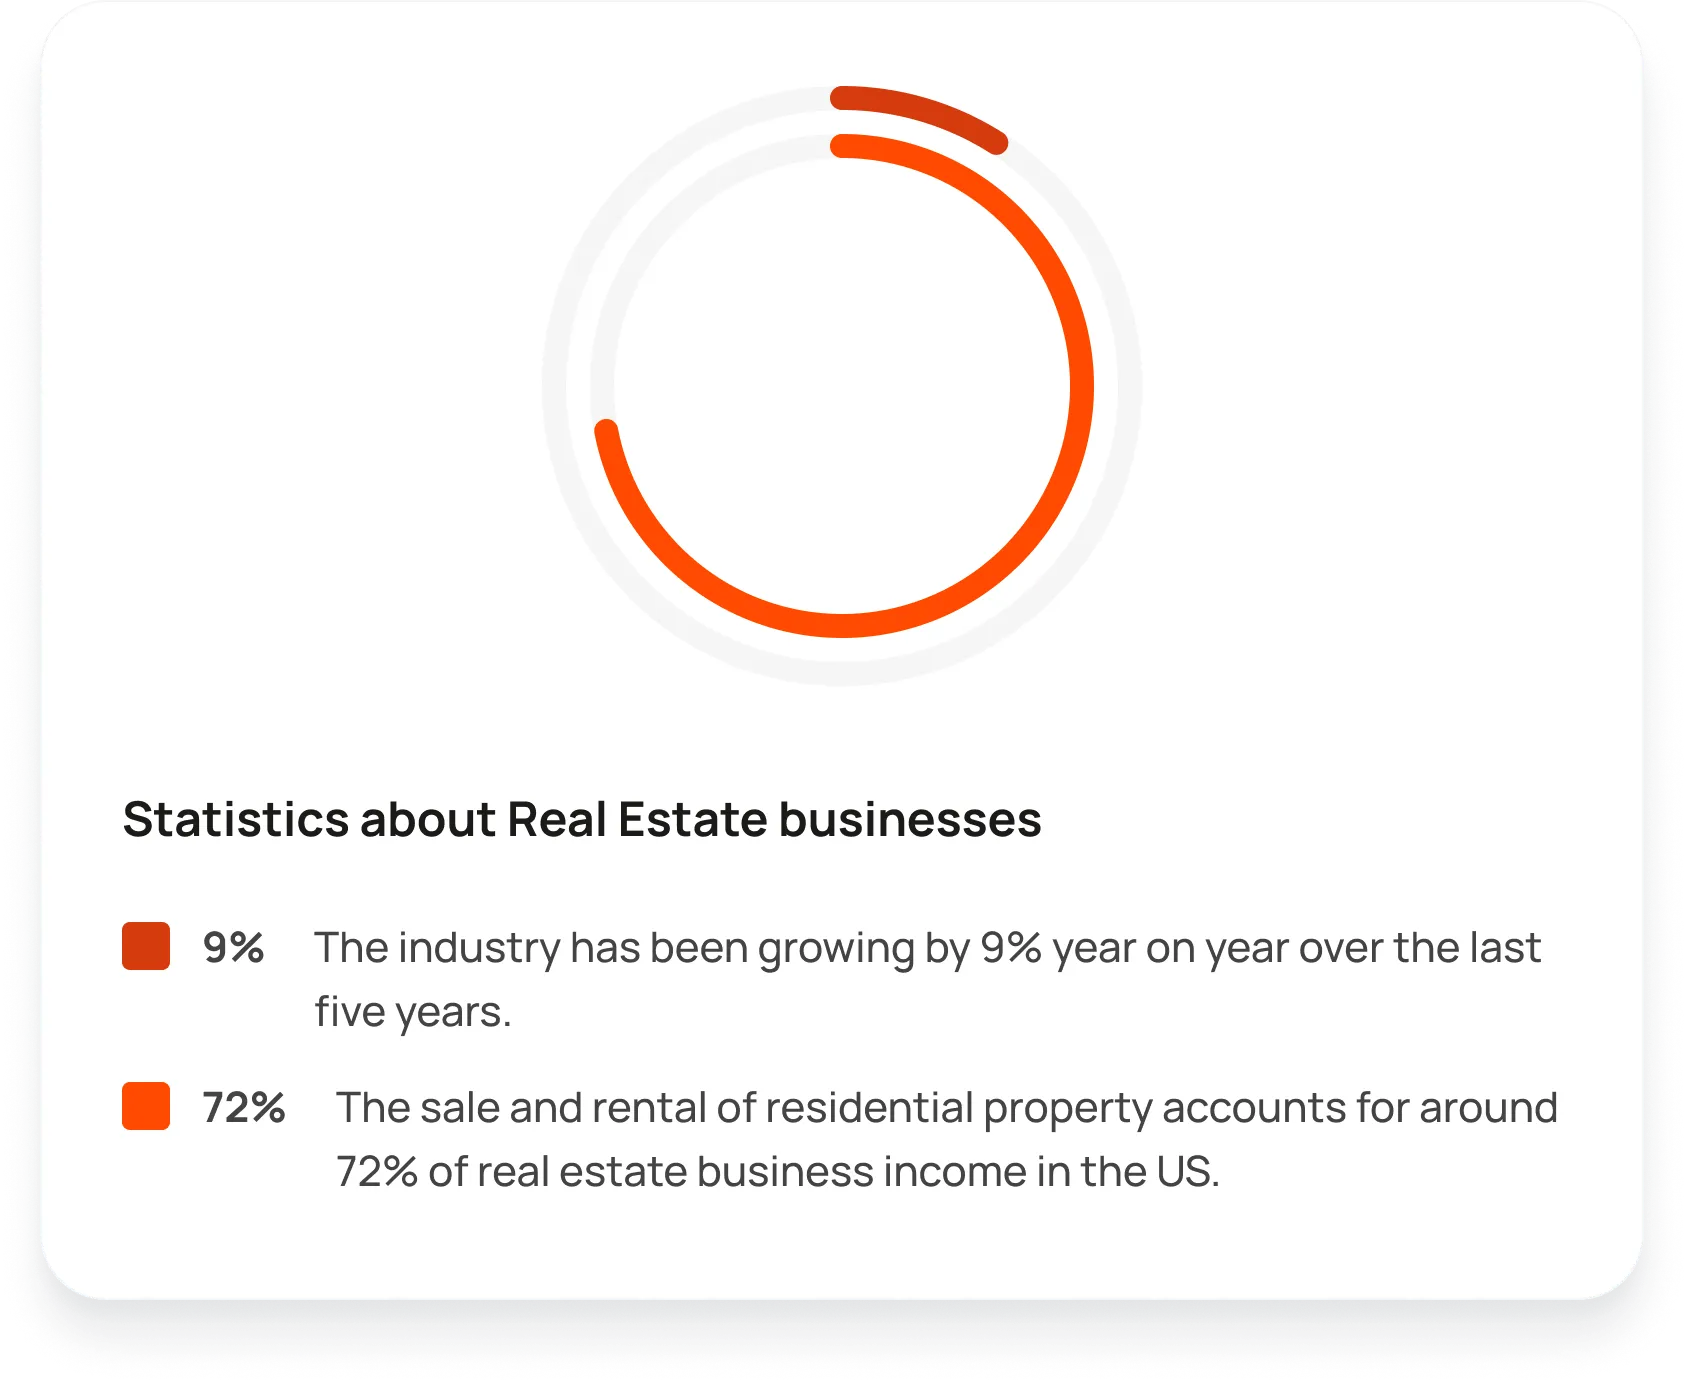 Statistics about Real Estate businesses